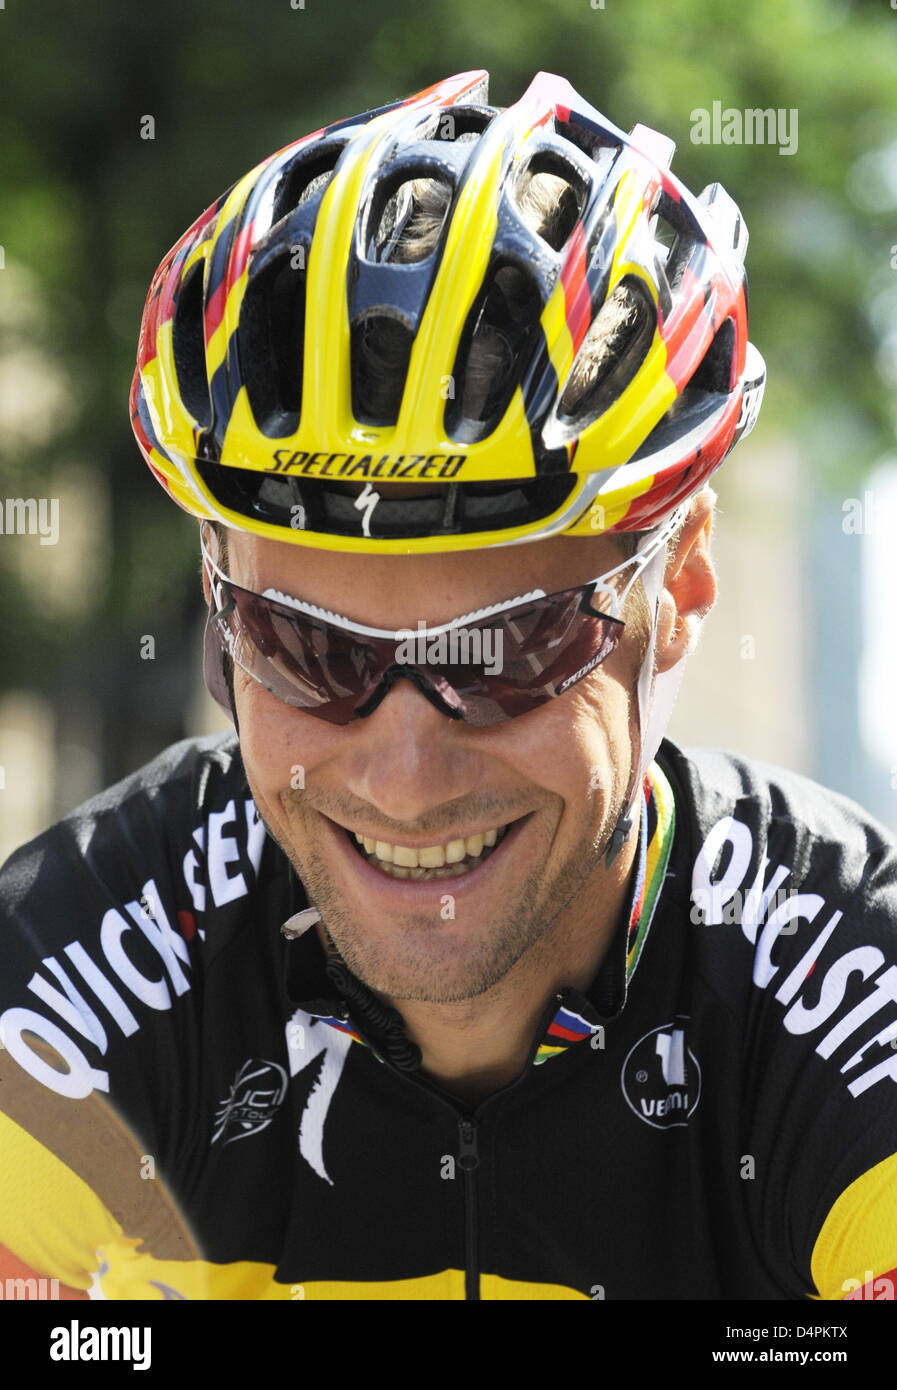 Belgian Tom Boonen prepares for the start of the Vattenfall Cyclassics in Hamburg, Germany, 16 August 2009. Apart from the professional?s race over 216,4 km, some 22.000 hobby cyclists compete on three routes over 55, 100 and 155 km in an around Hamburg. Photo: Maurizio Gambarini Stock Photo